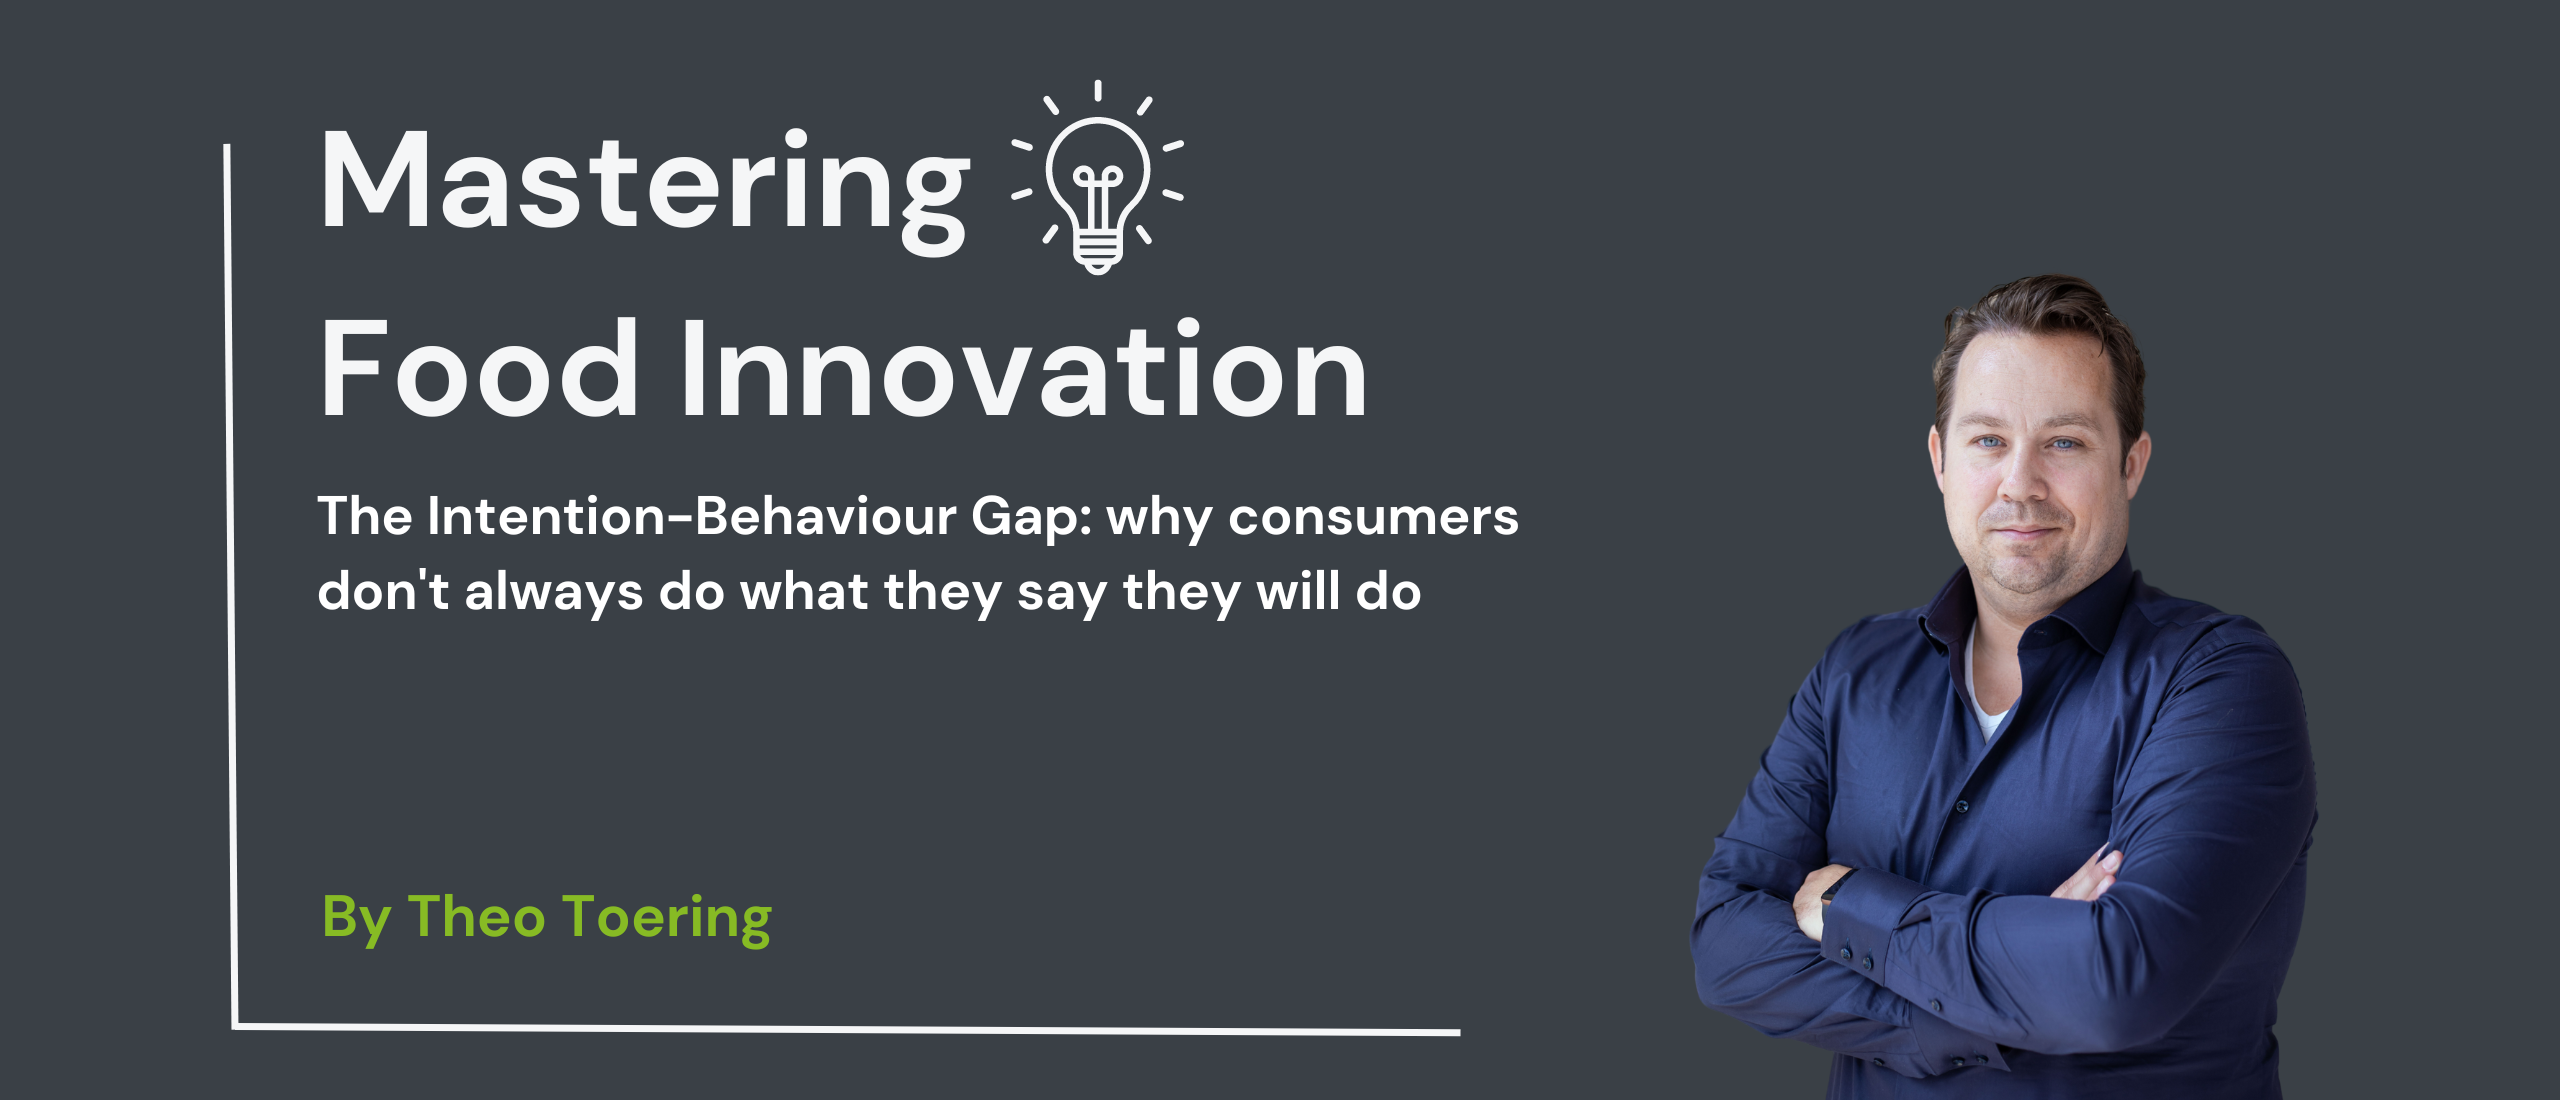 The Intention-Behaviour Gap: why consumers don't always do what they say they will do